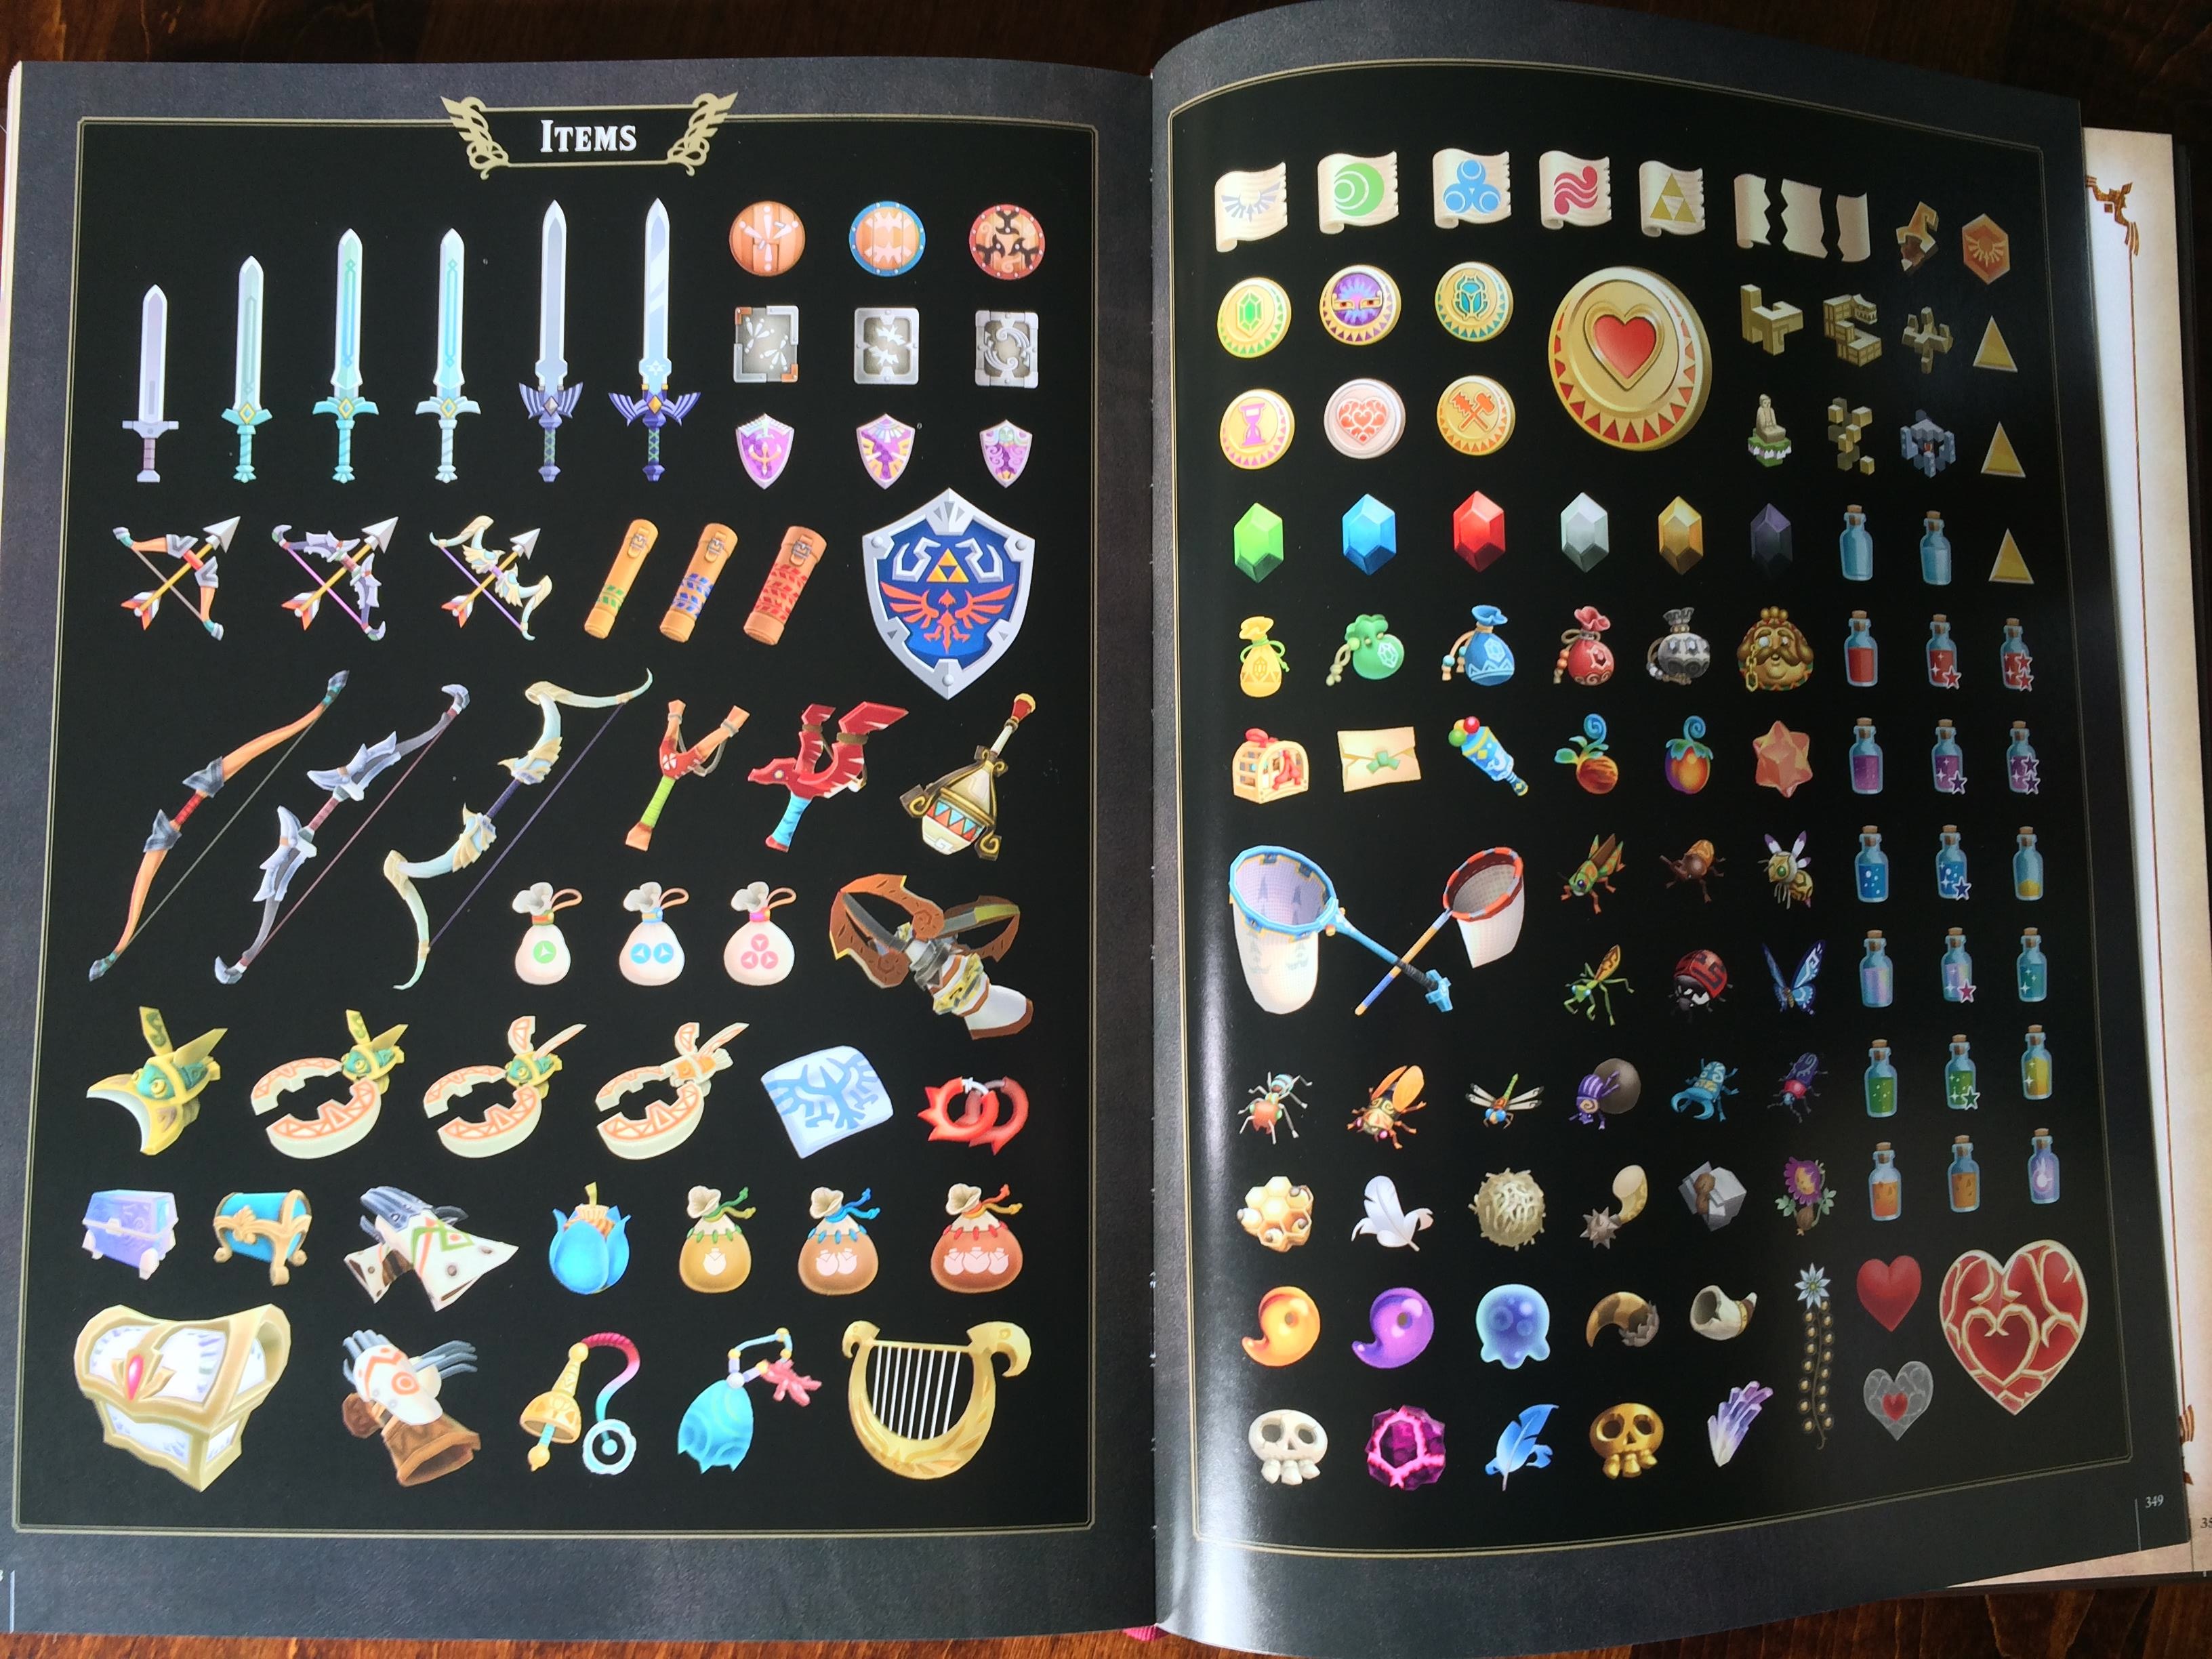 A comparison of some of the many items present in one of the Legend of Zelda games